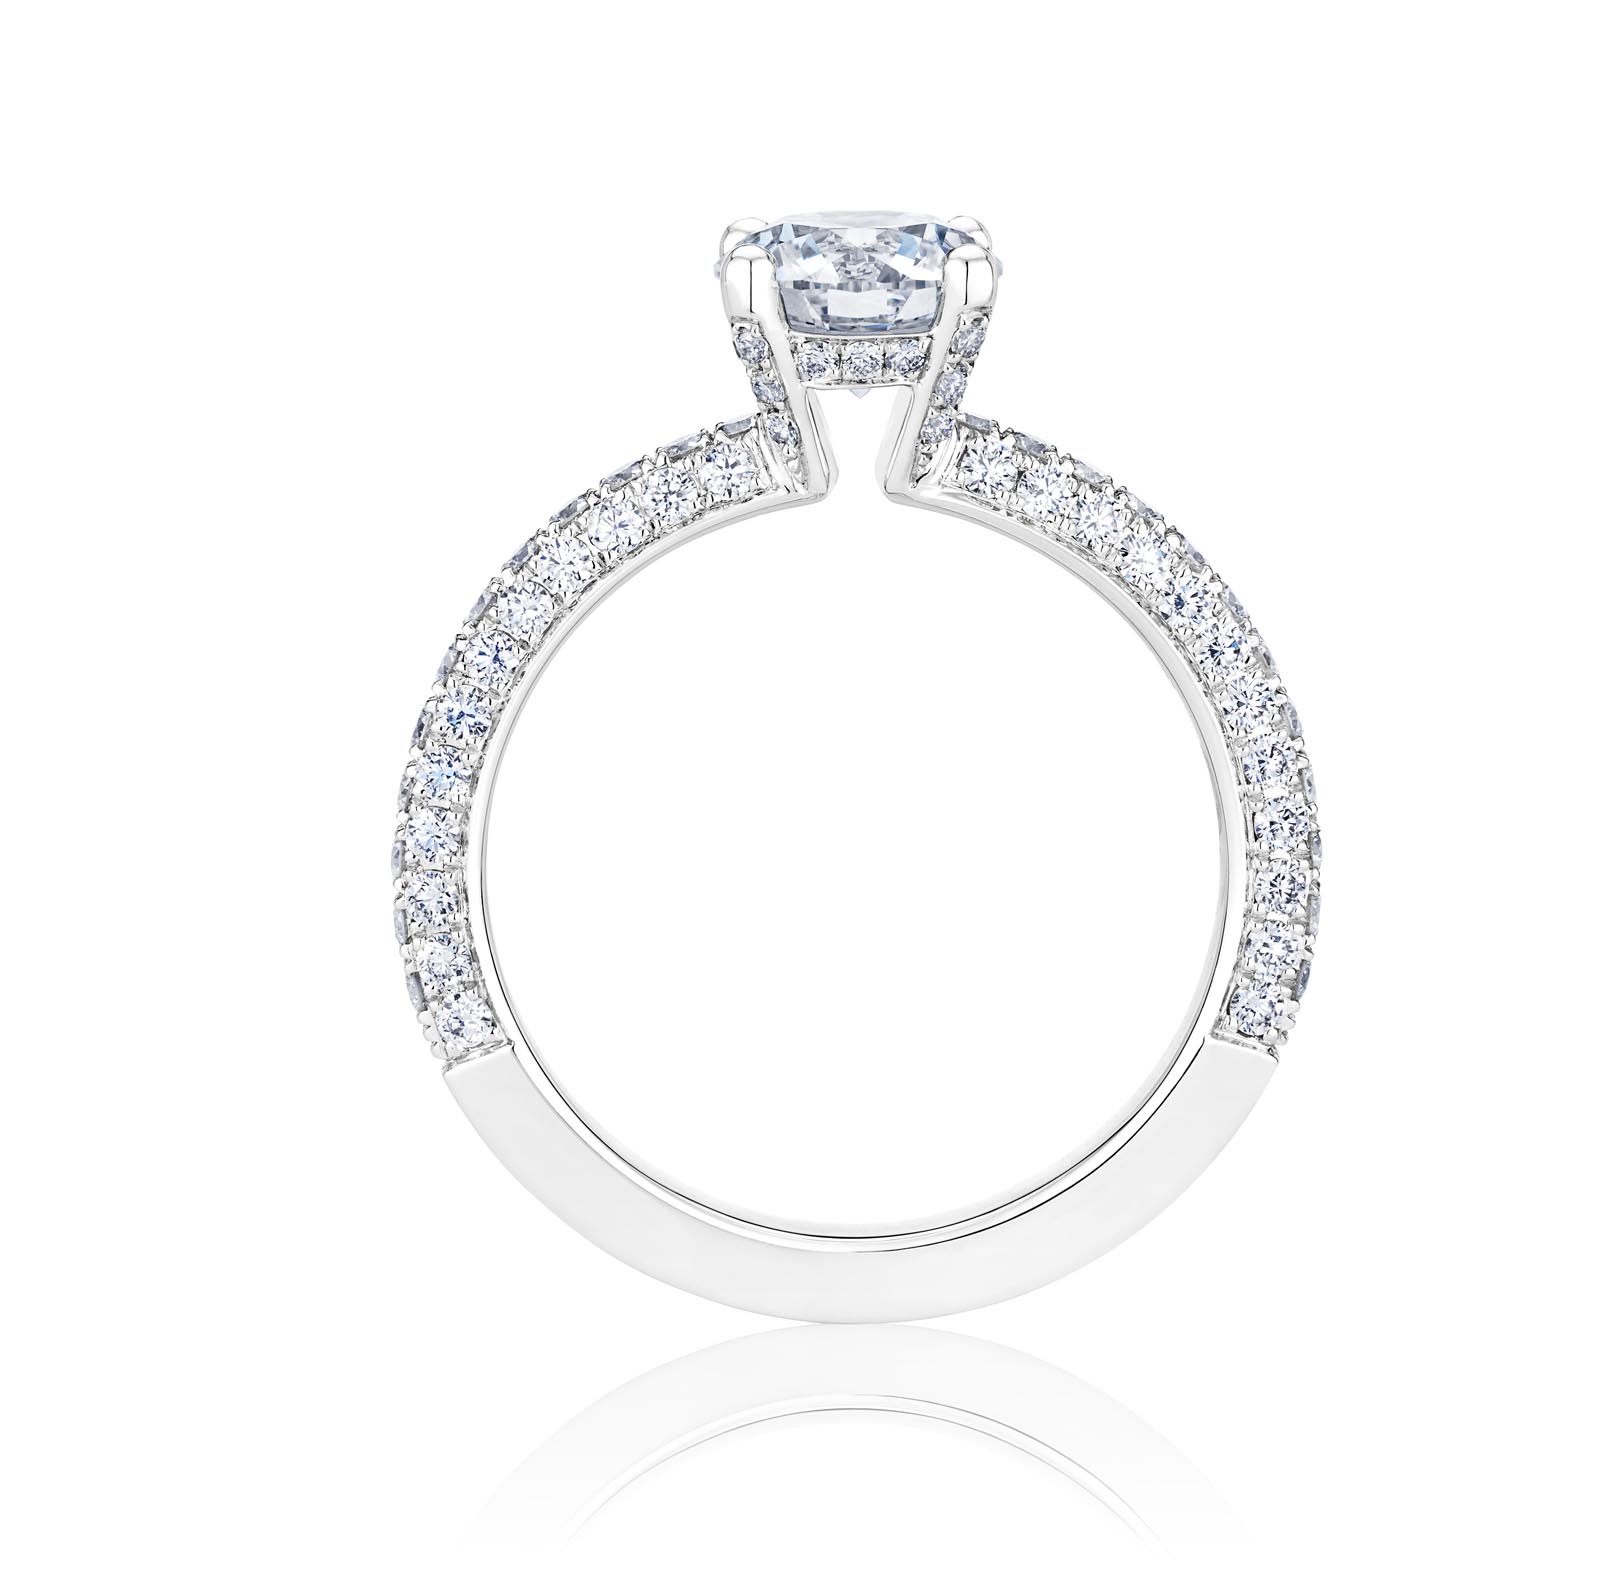 The DB Darling engagement ring